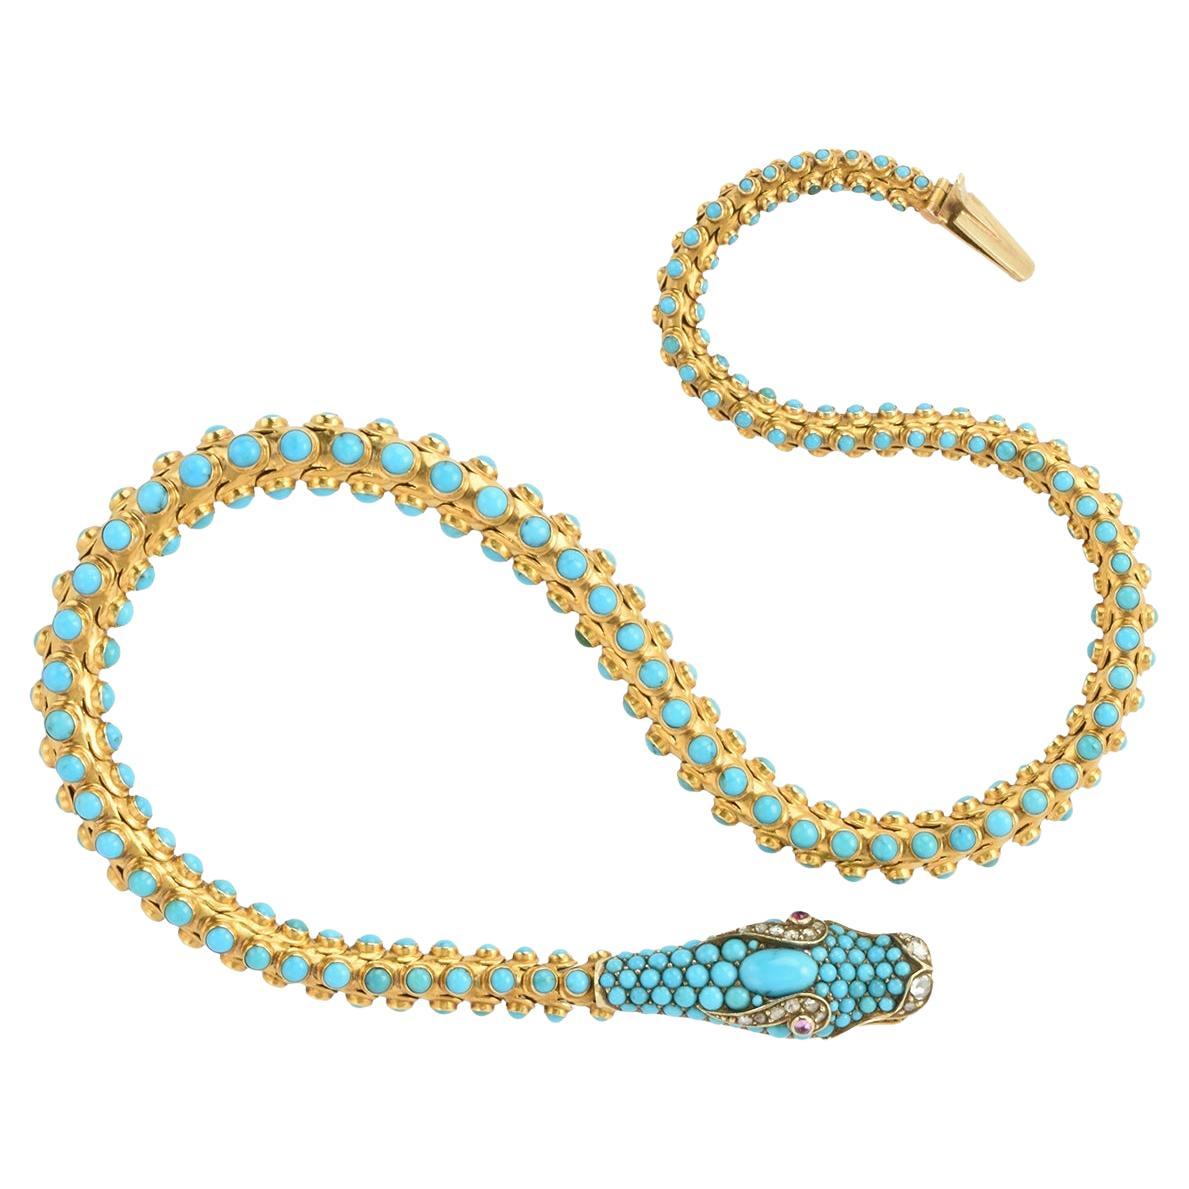 Victorian 15k Gold & Turquoise Snake Necklace, circa 1860